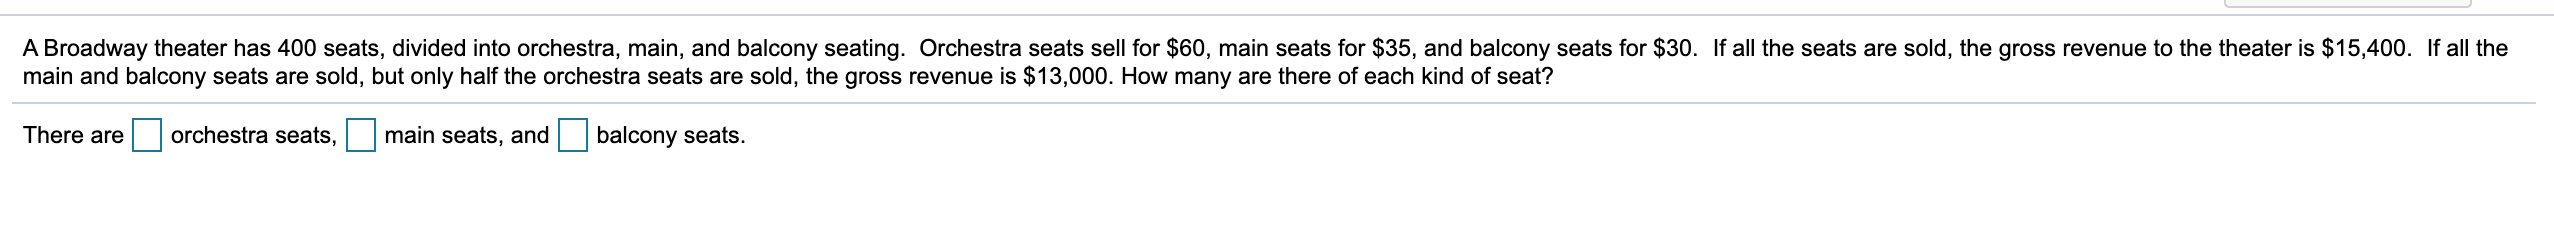 A Broadway theater has 400 seats, divided into orchestra, main, and balcony seating. Orchestra seats sell for $60, main seats for $35, and balcony seats for $30. If all the seats are sold, the gross revenue to the theater is $15,400. If all the
main and balcony seats are sold, but only half the orchestra seats are sold, the gross revenue is $13,000. How many are there of each kind of seat?
There are
orchestra seats,
main seats, and
balcony seats.
